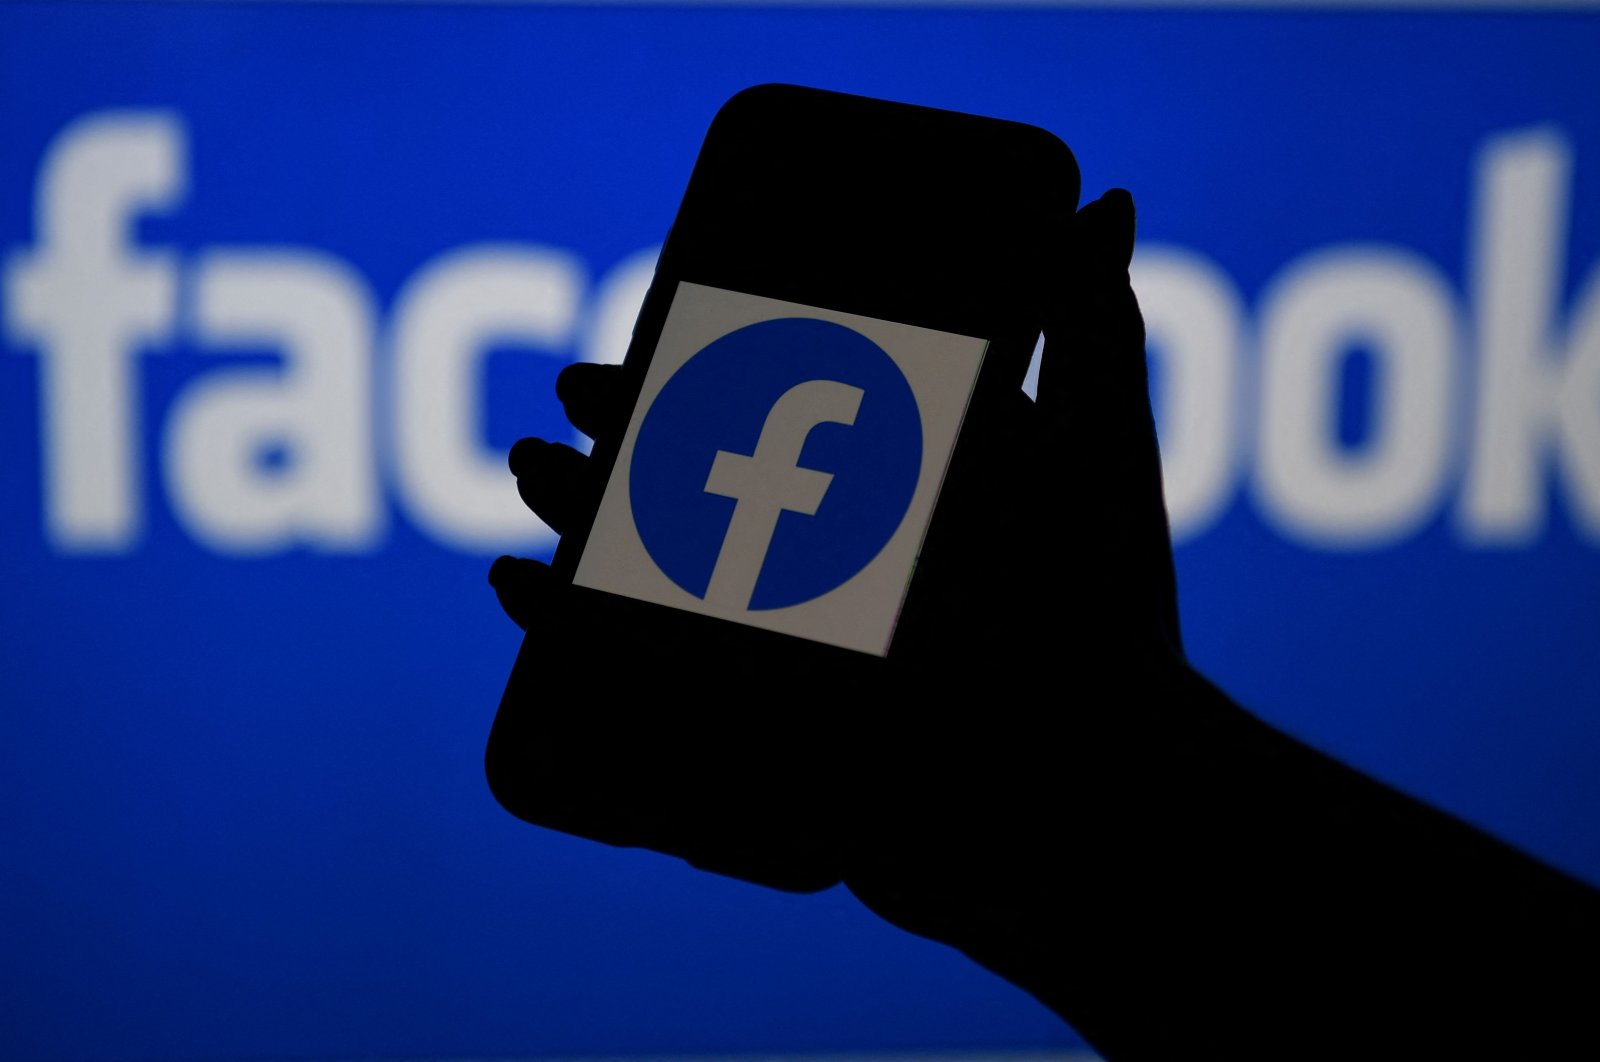 In this file photo illustration, a smart phone screen displays the logo of Facebook on a Facebook website background, on April 7, 2021, in Arlington, Virginia. (AFP Photo)